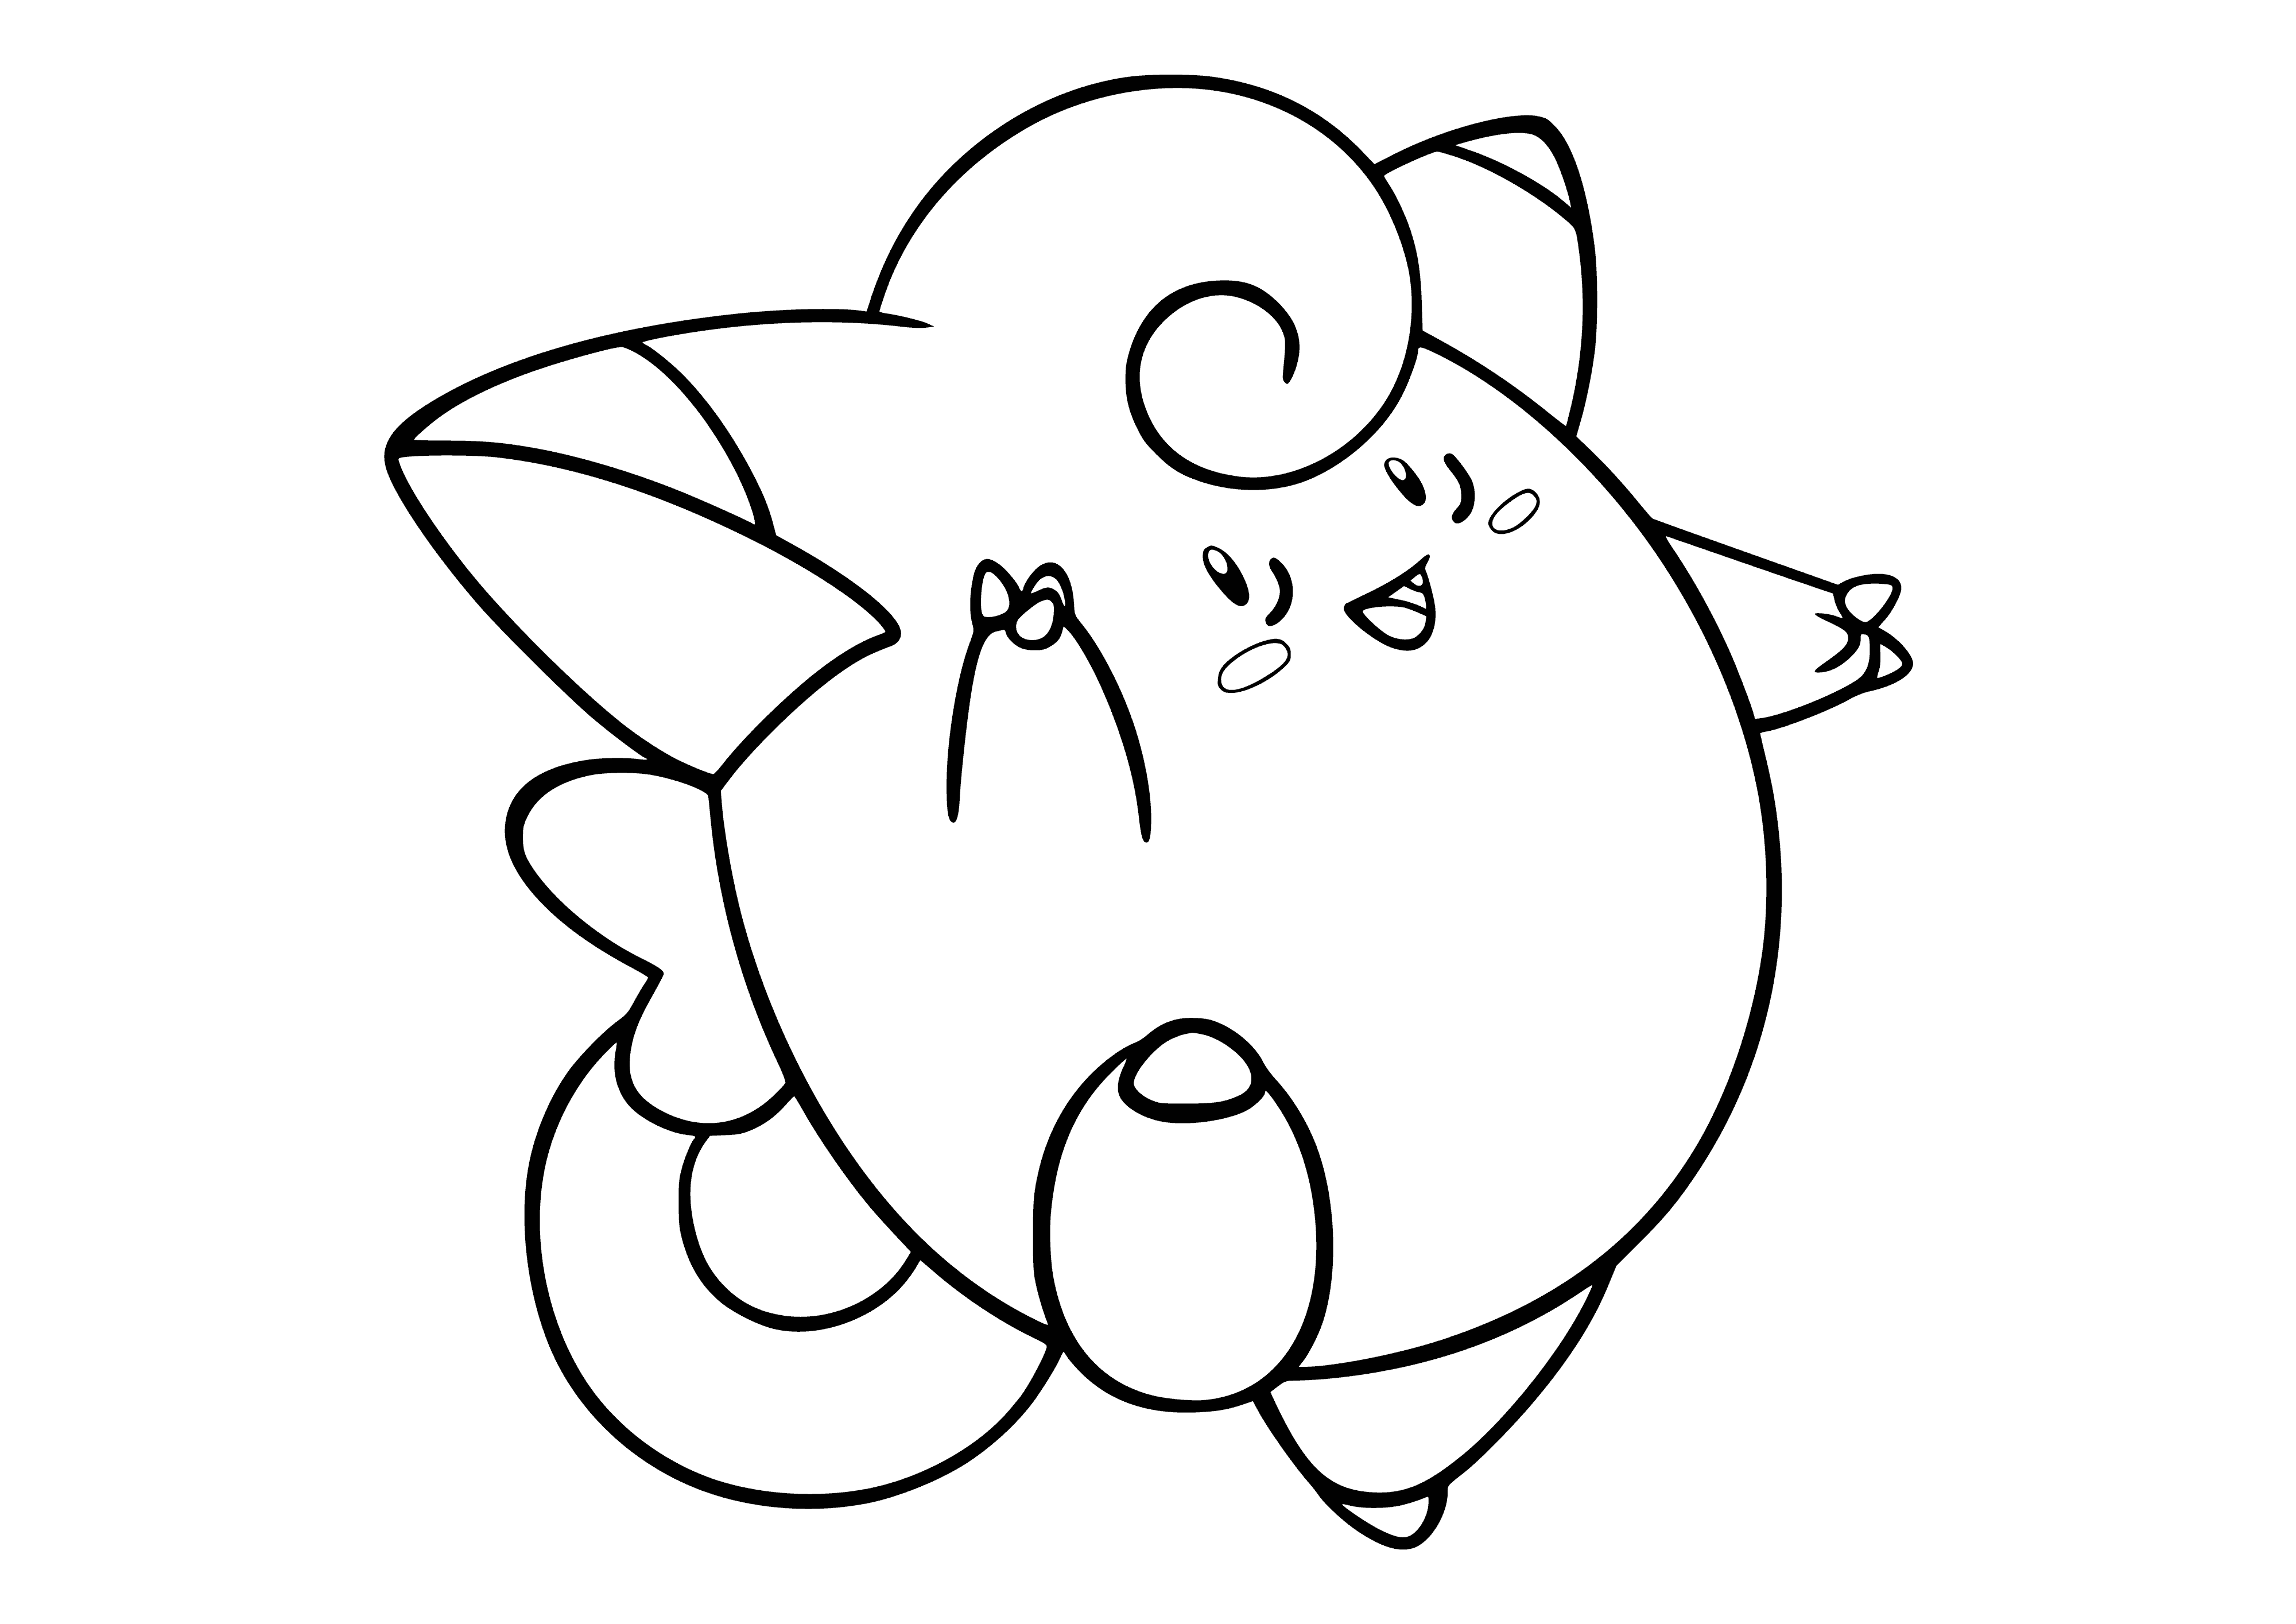 coloring page: Small, fluffy creature w/round ears, white body, & pink spots. Big head, small legs & arms. Looks gentle & benign.